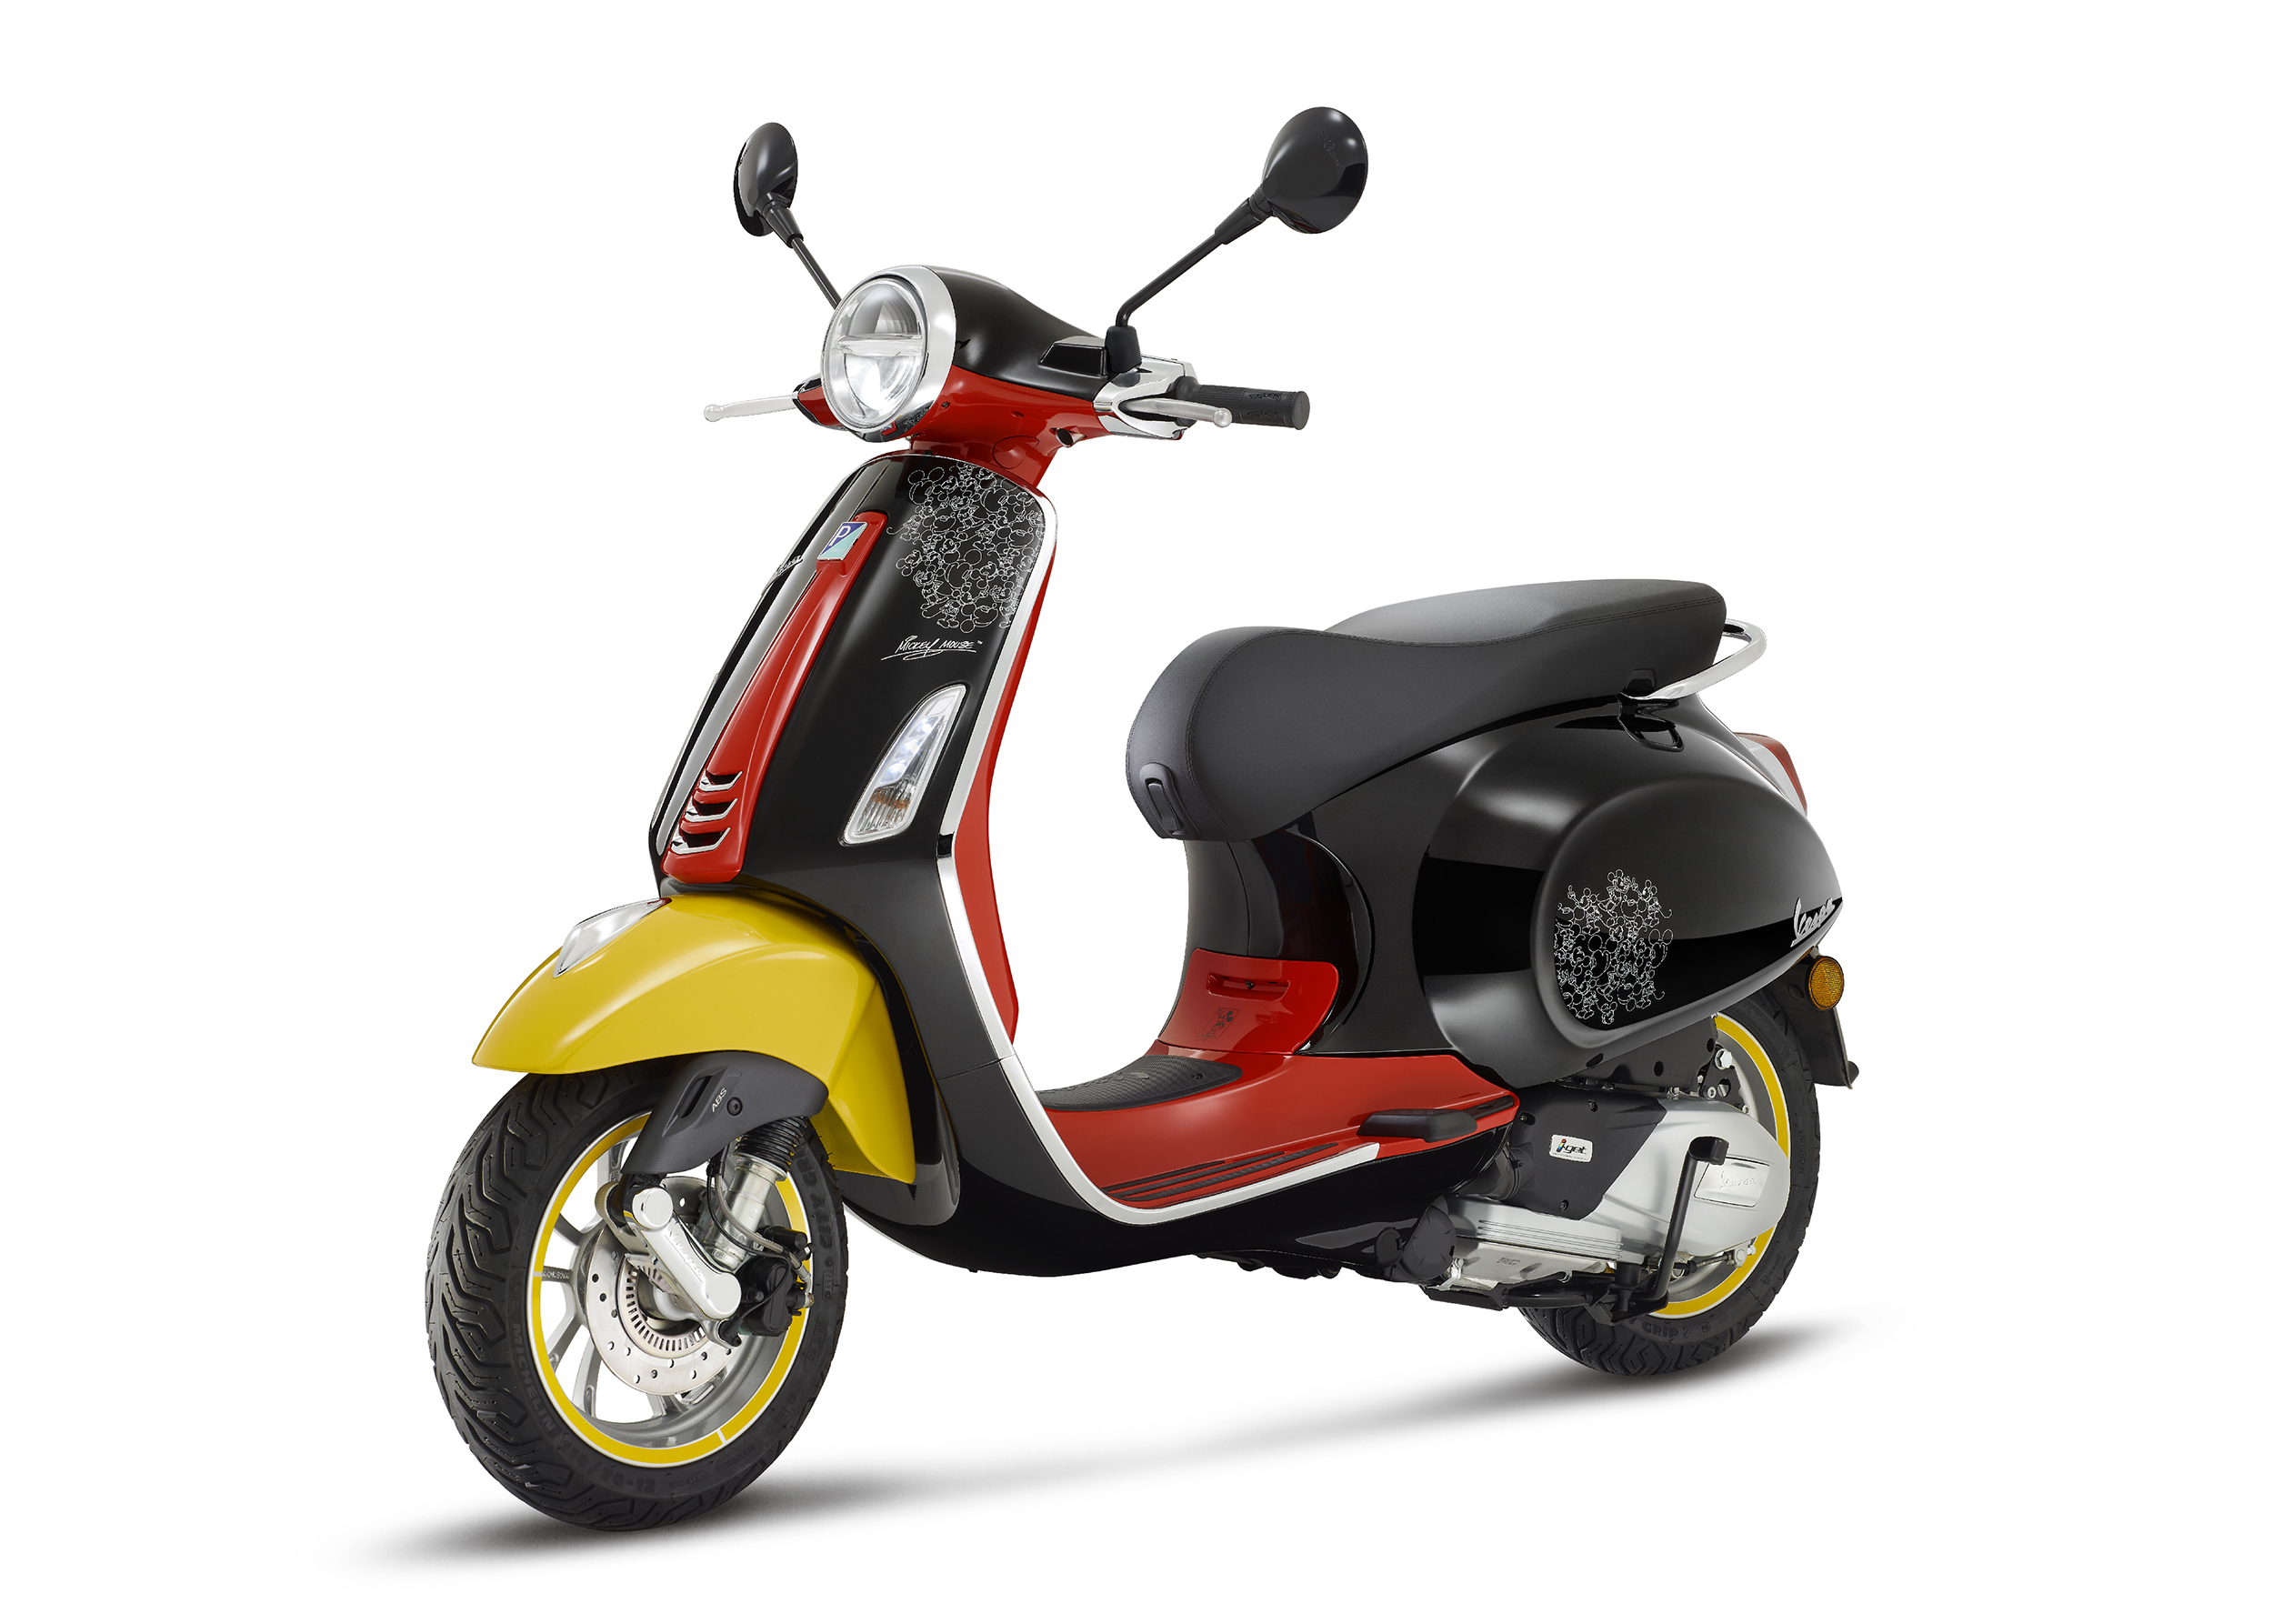 Piaggio Mickey Mouse-Themed Vespa Scooter Unveiled for Disney's